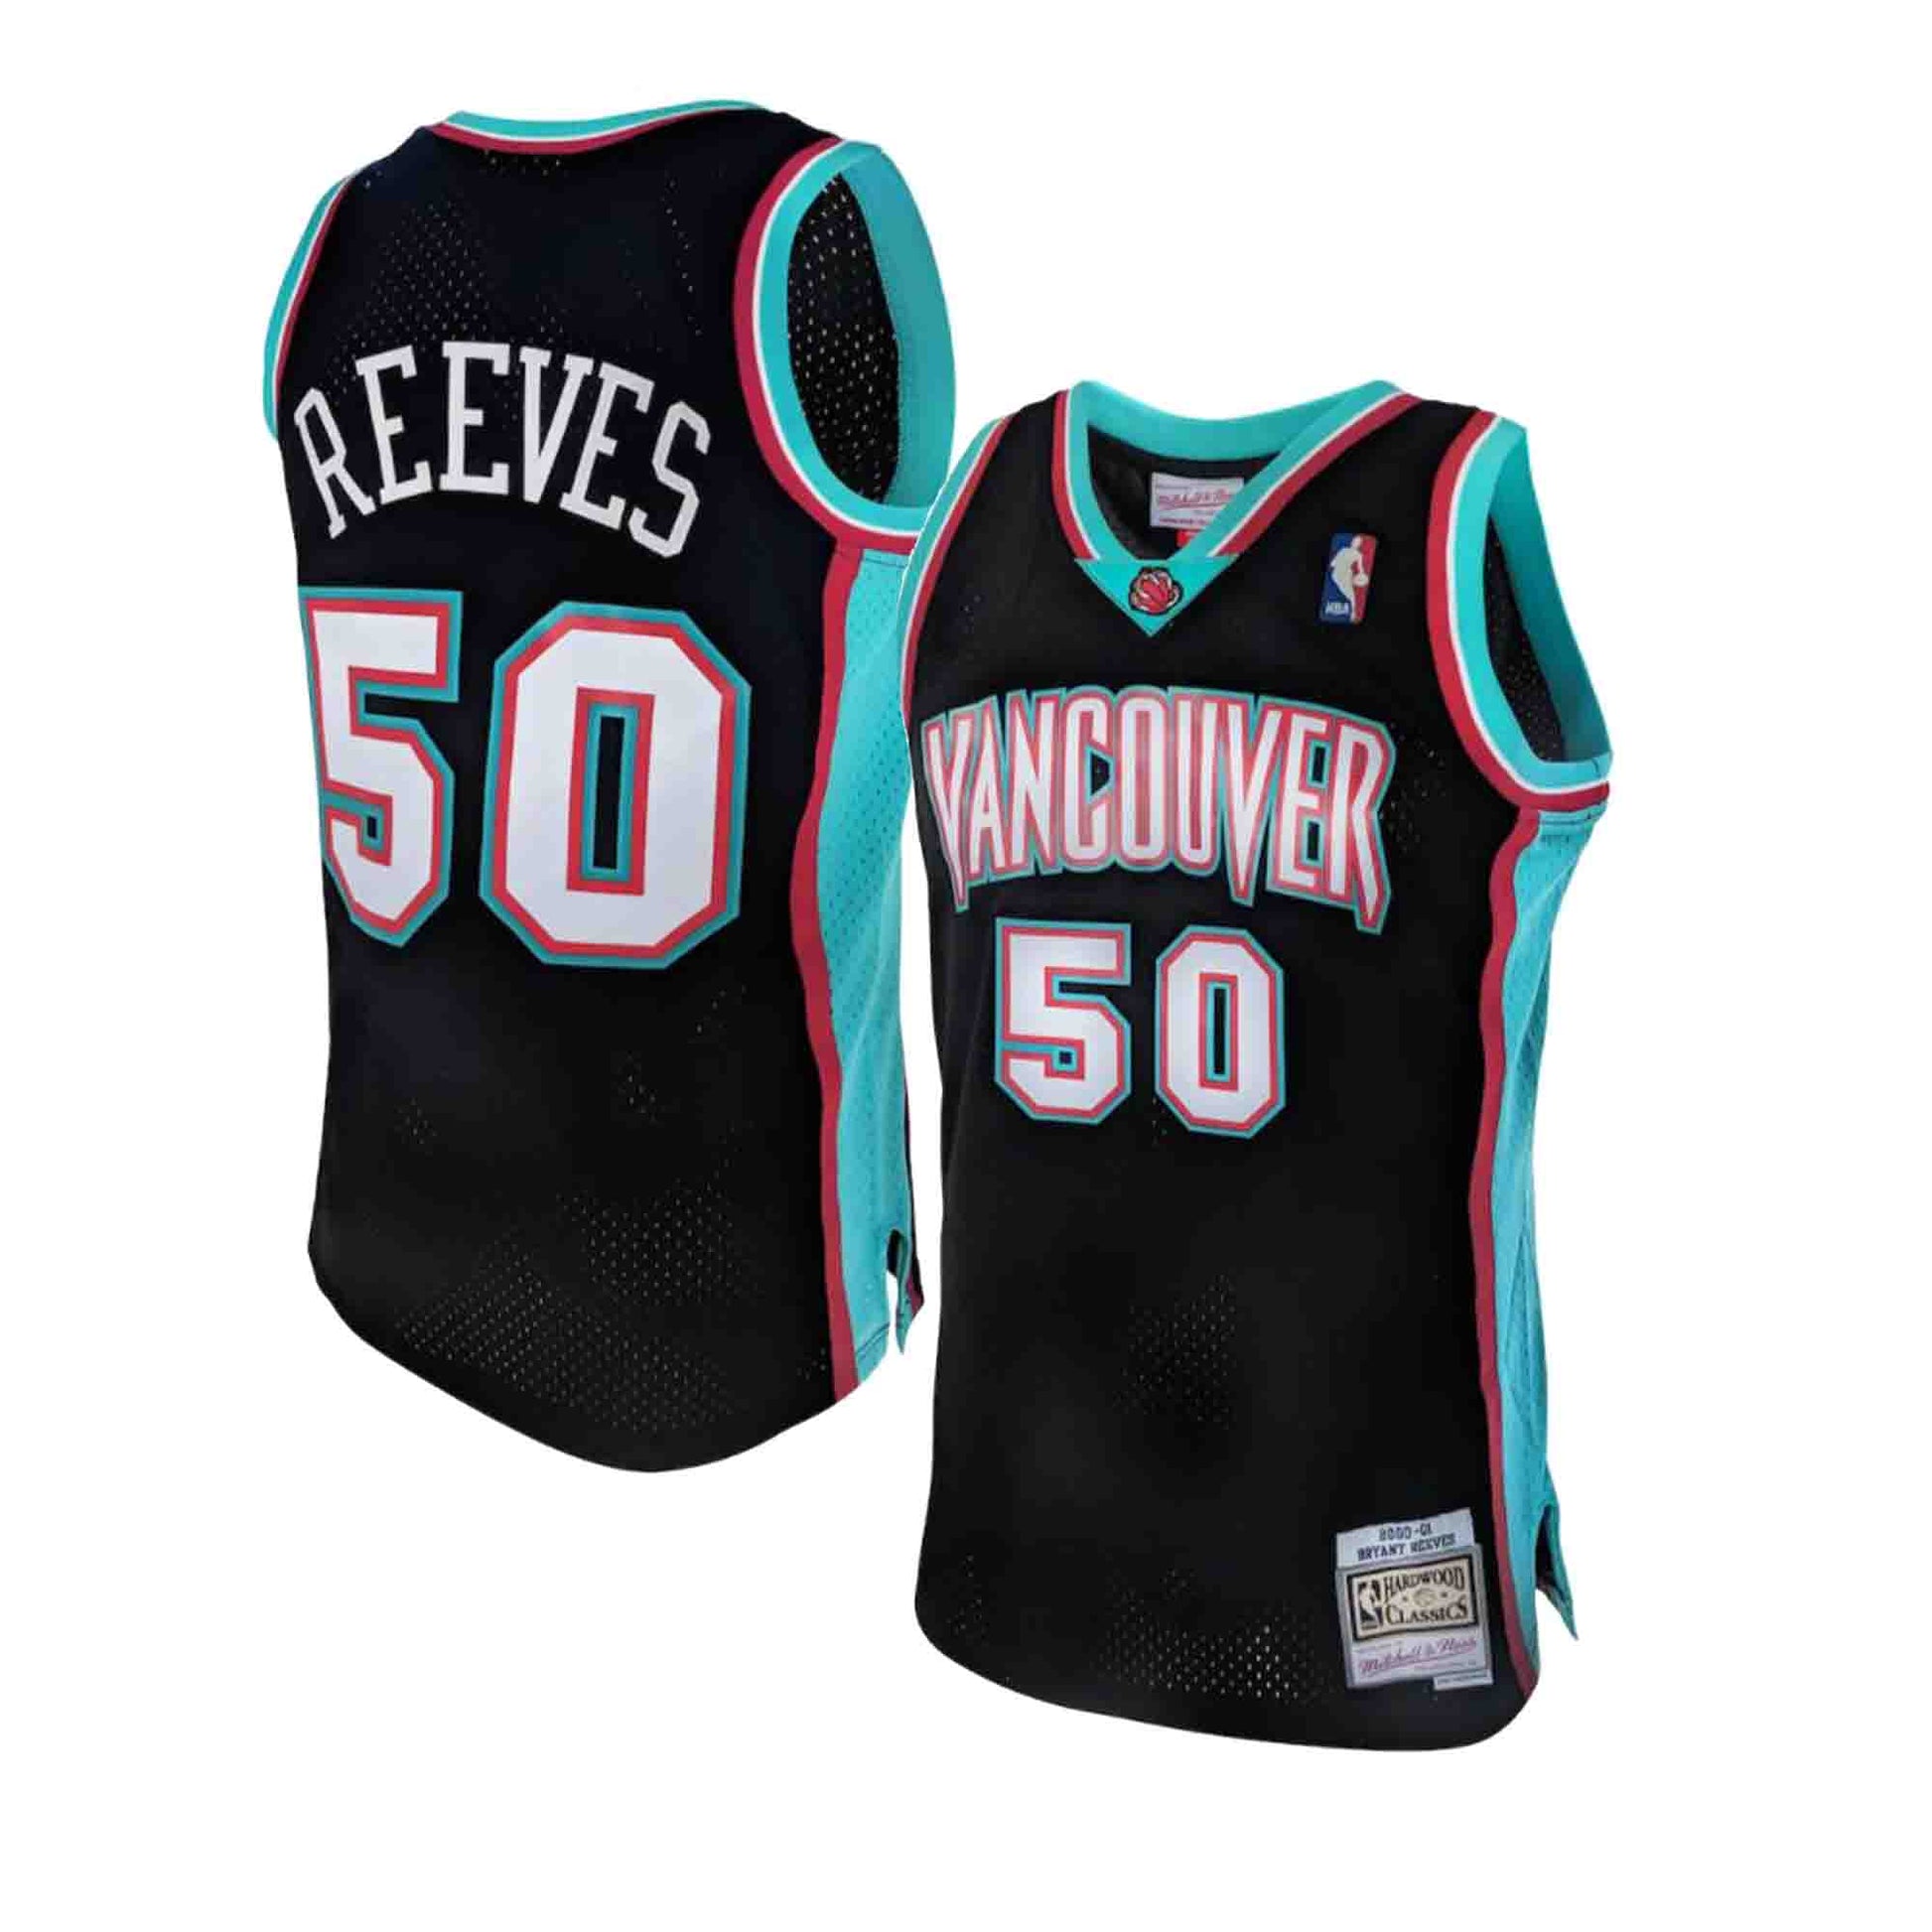 old vancouver grizzlies jersey